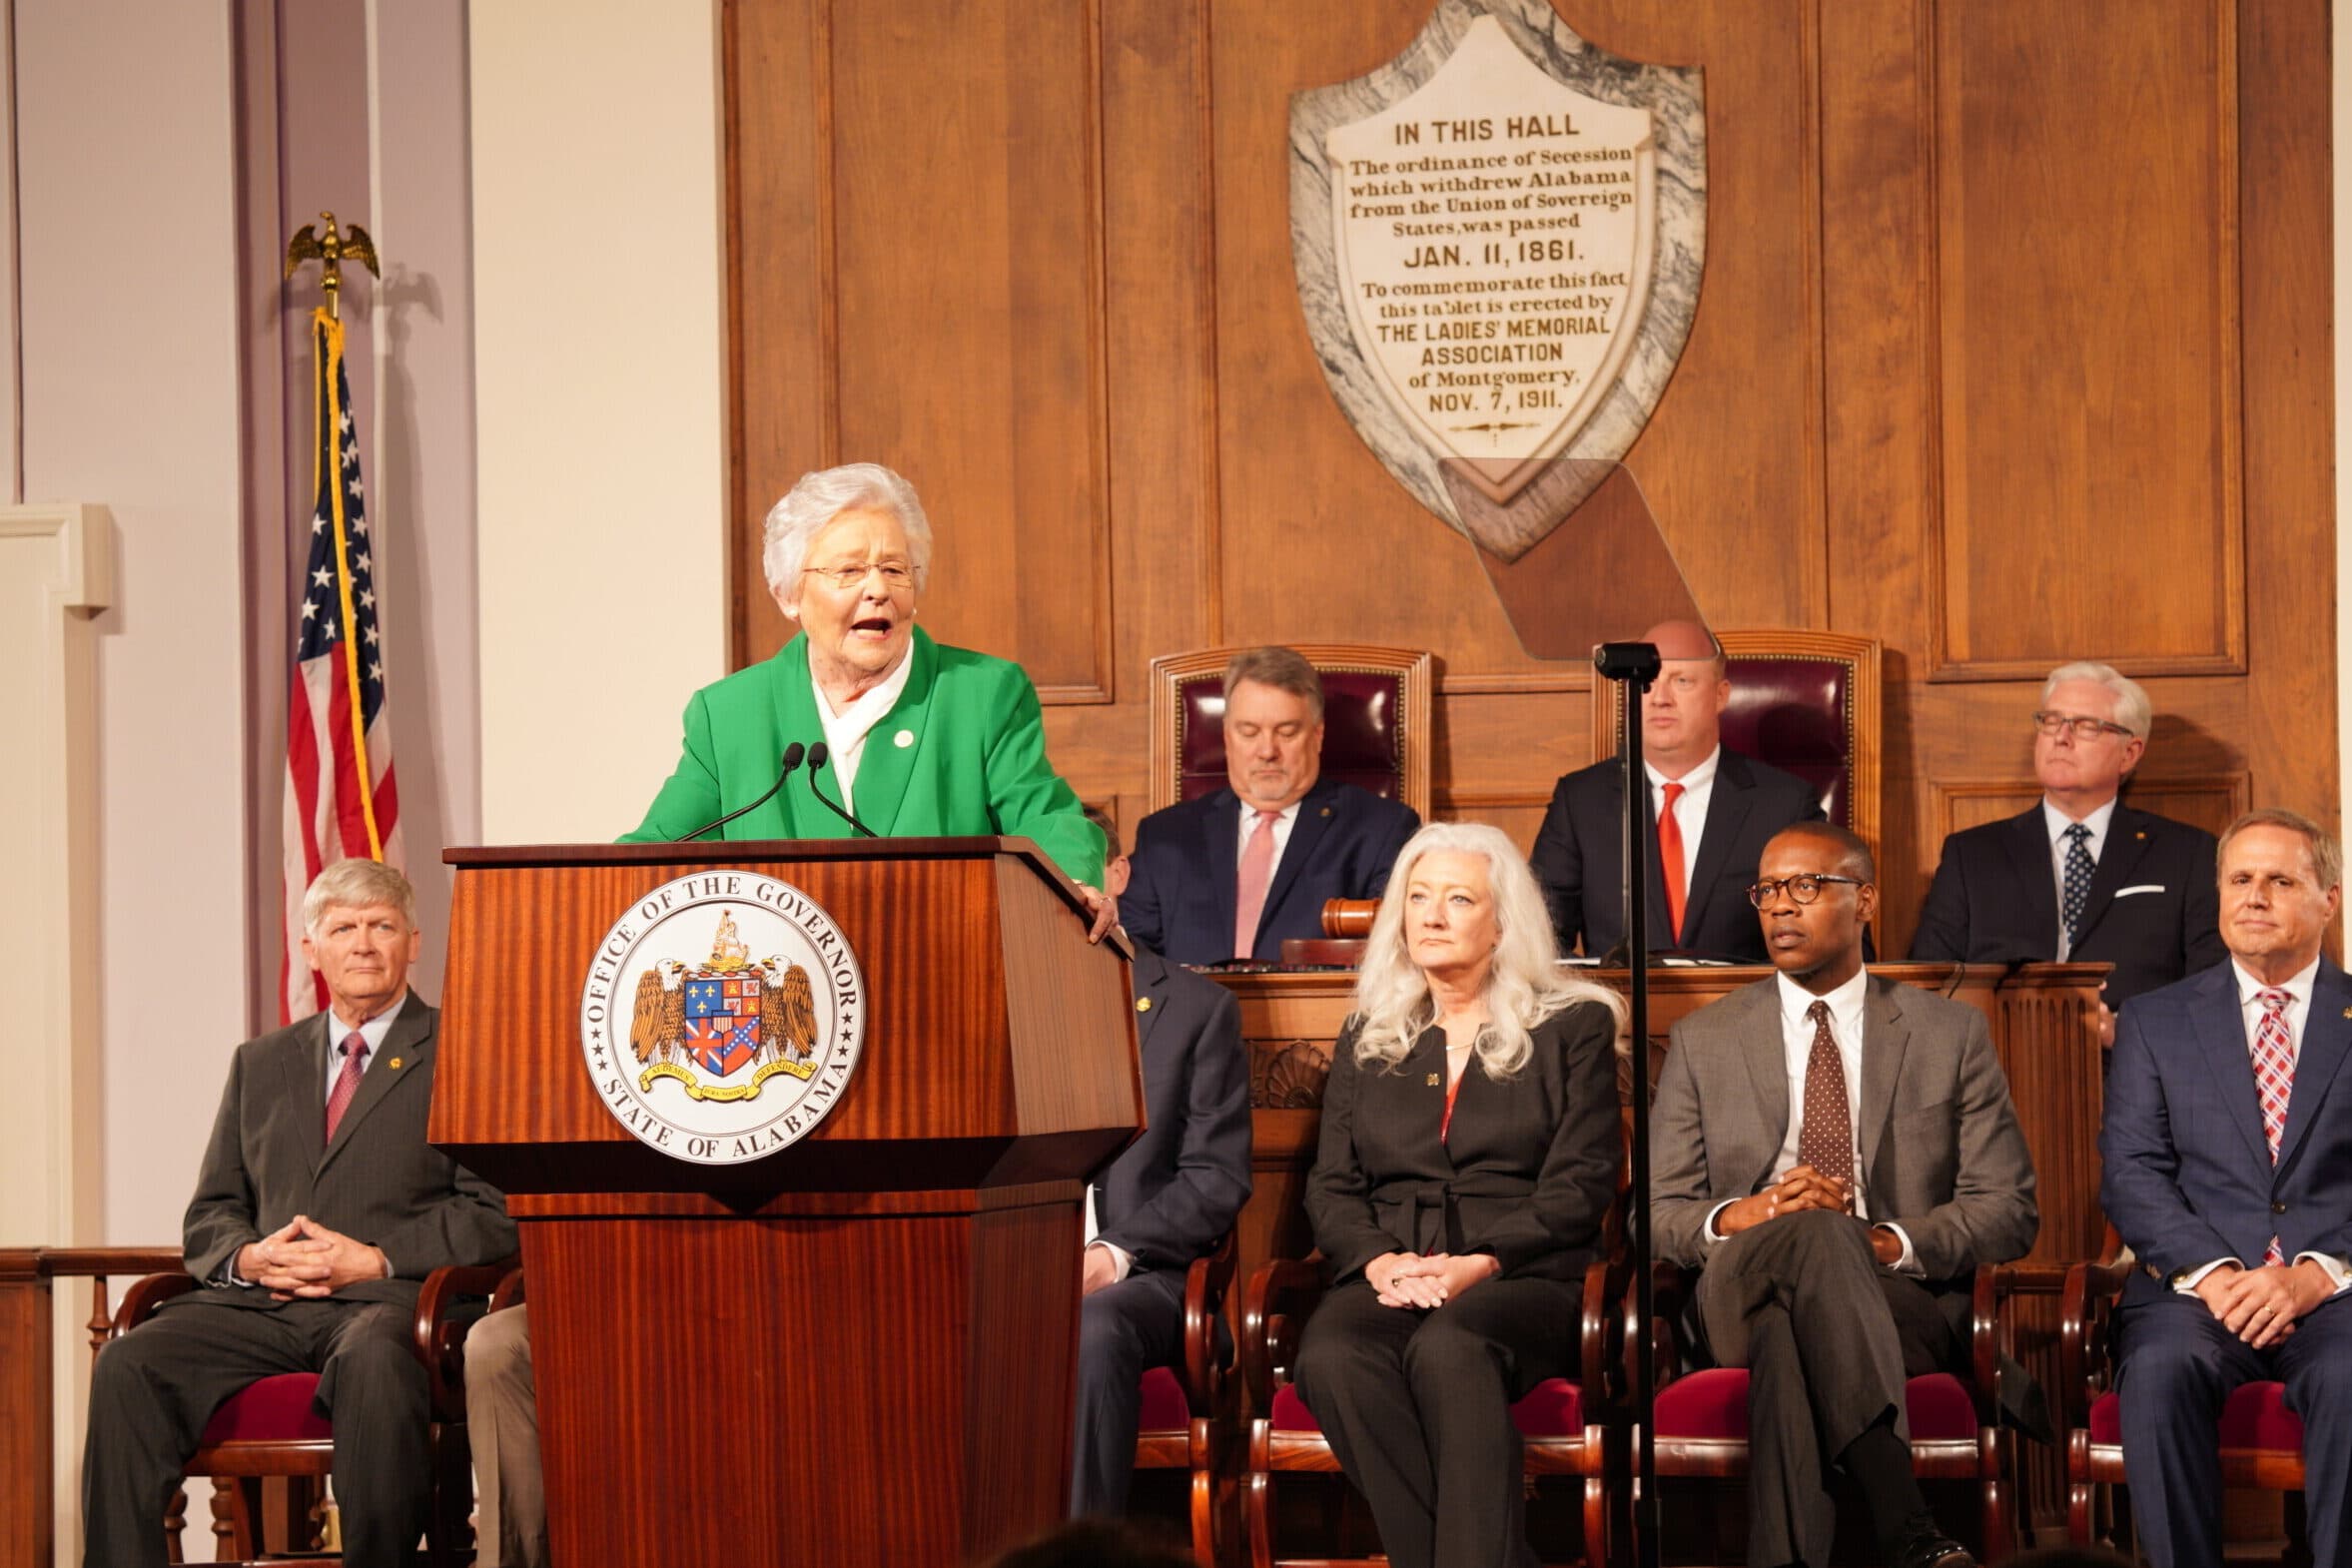 Gov. Kay Ivey State of the state